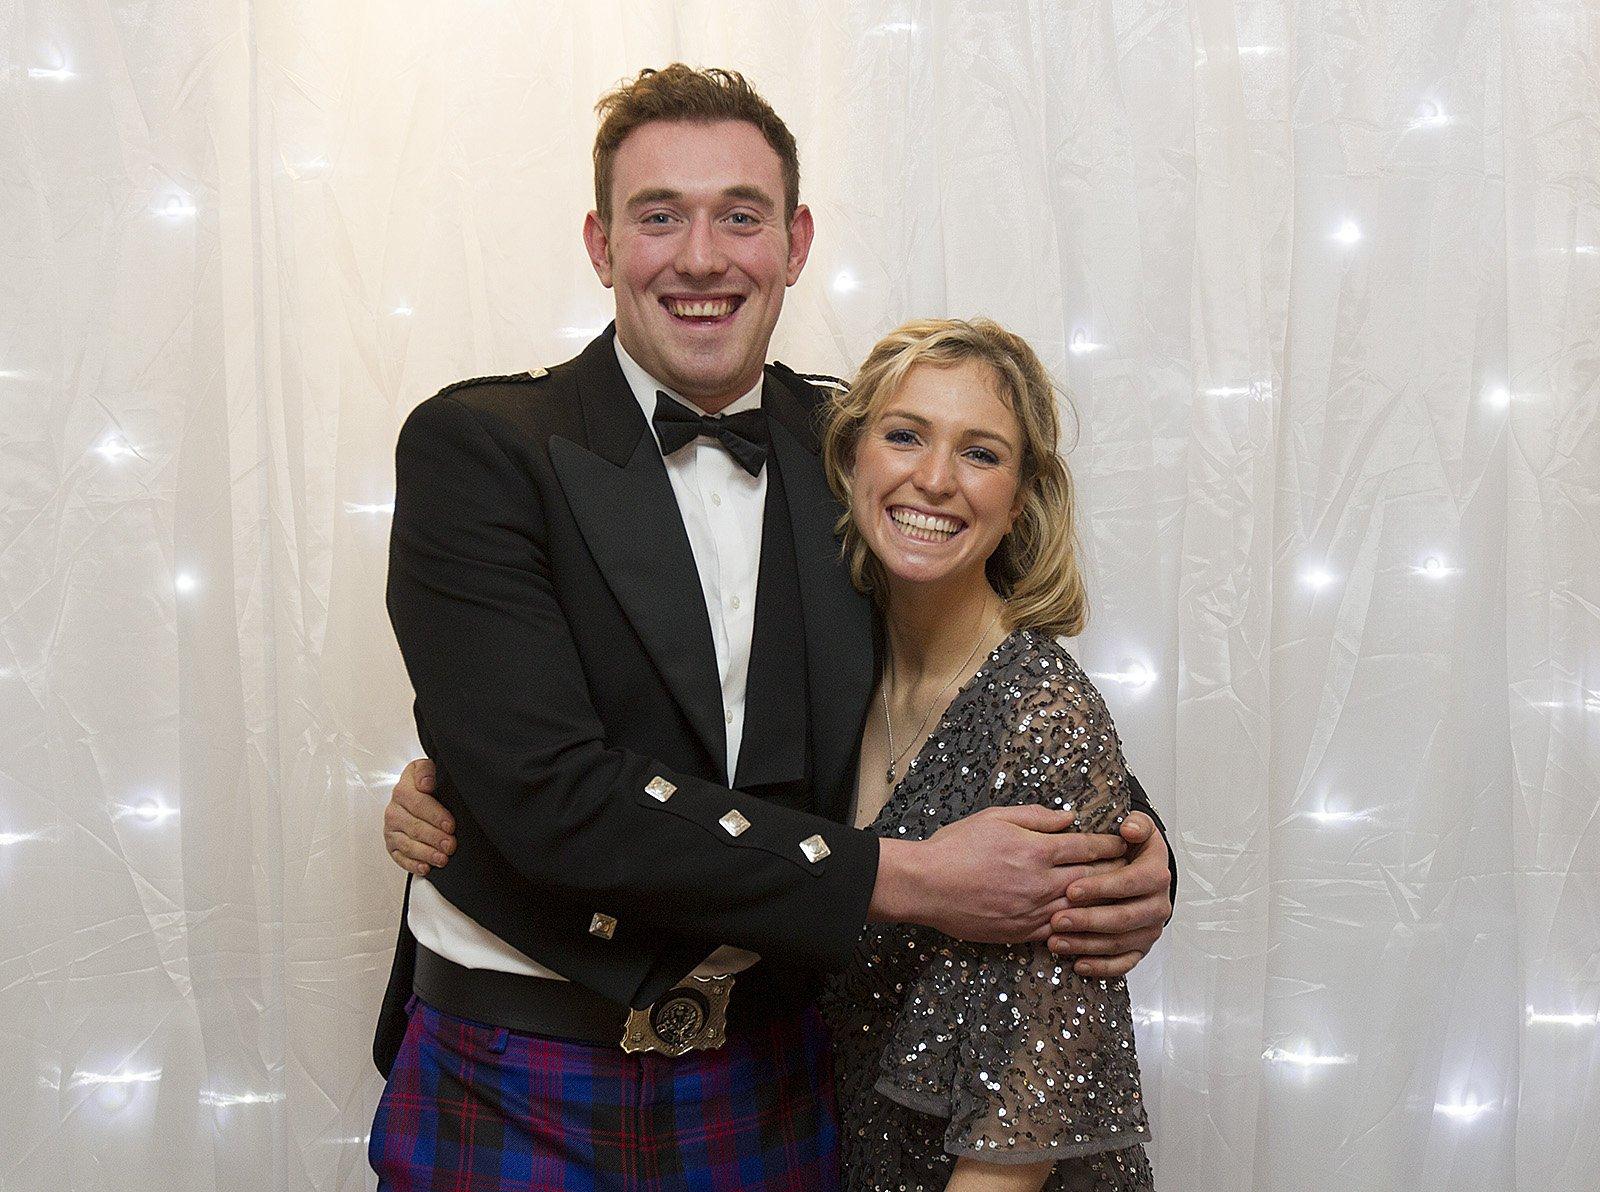 Andrew Dixon from Swinton with Emily Douglas Revellers at a young farmers' ball held in Kelso.